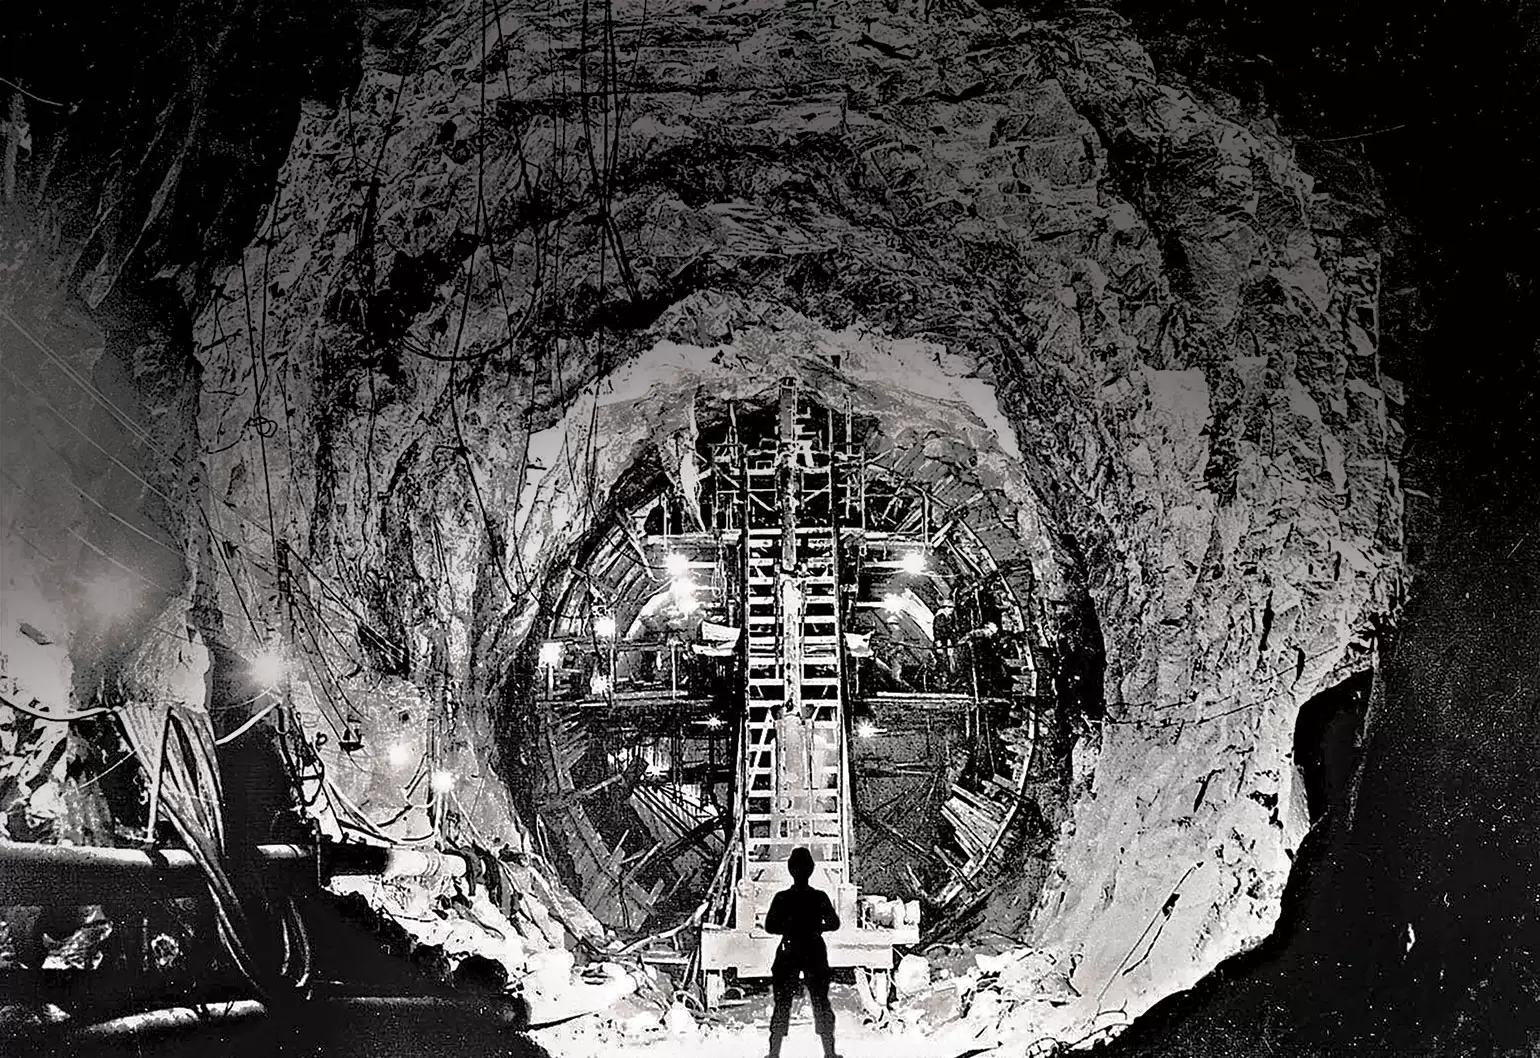 Tunnelling through the Snowy Mountains. (Image: National Archives of Australia/Fairfax Media)